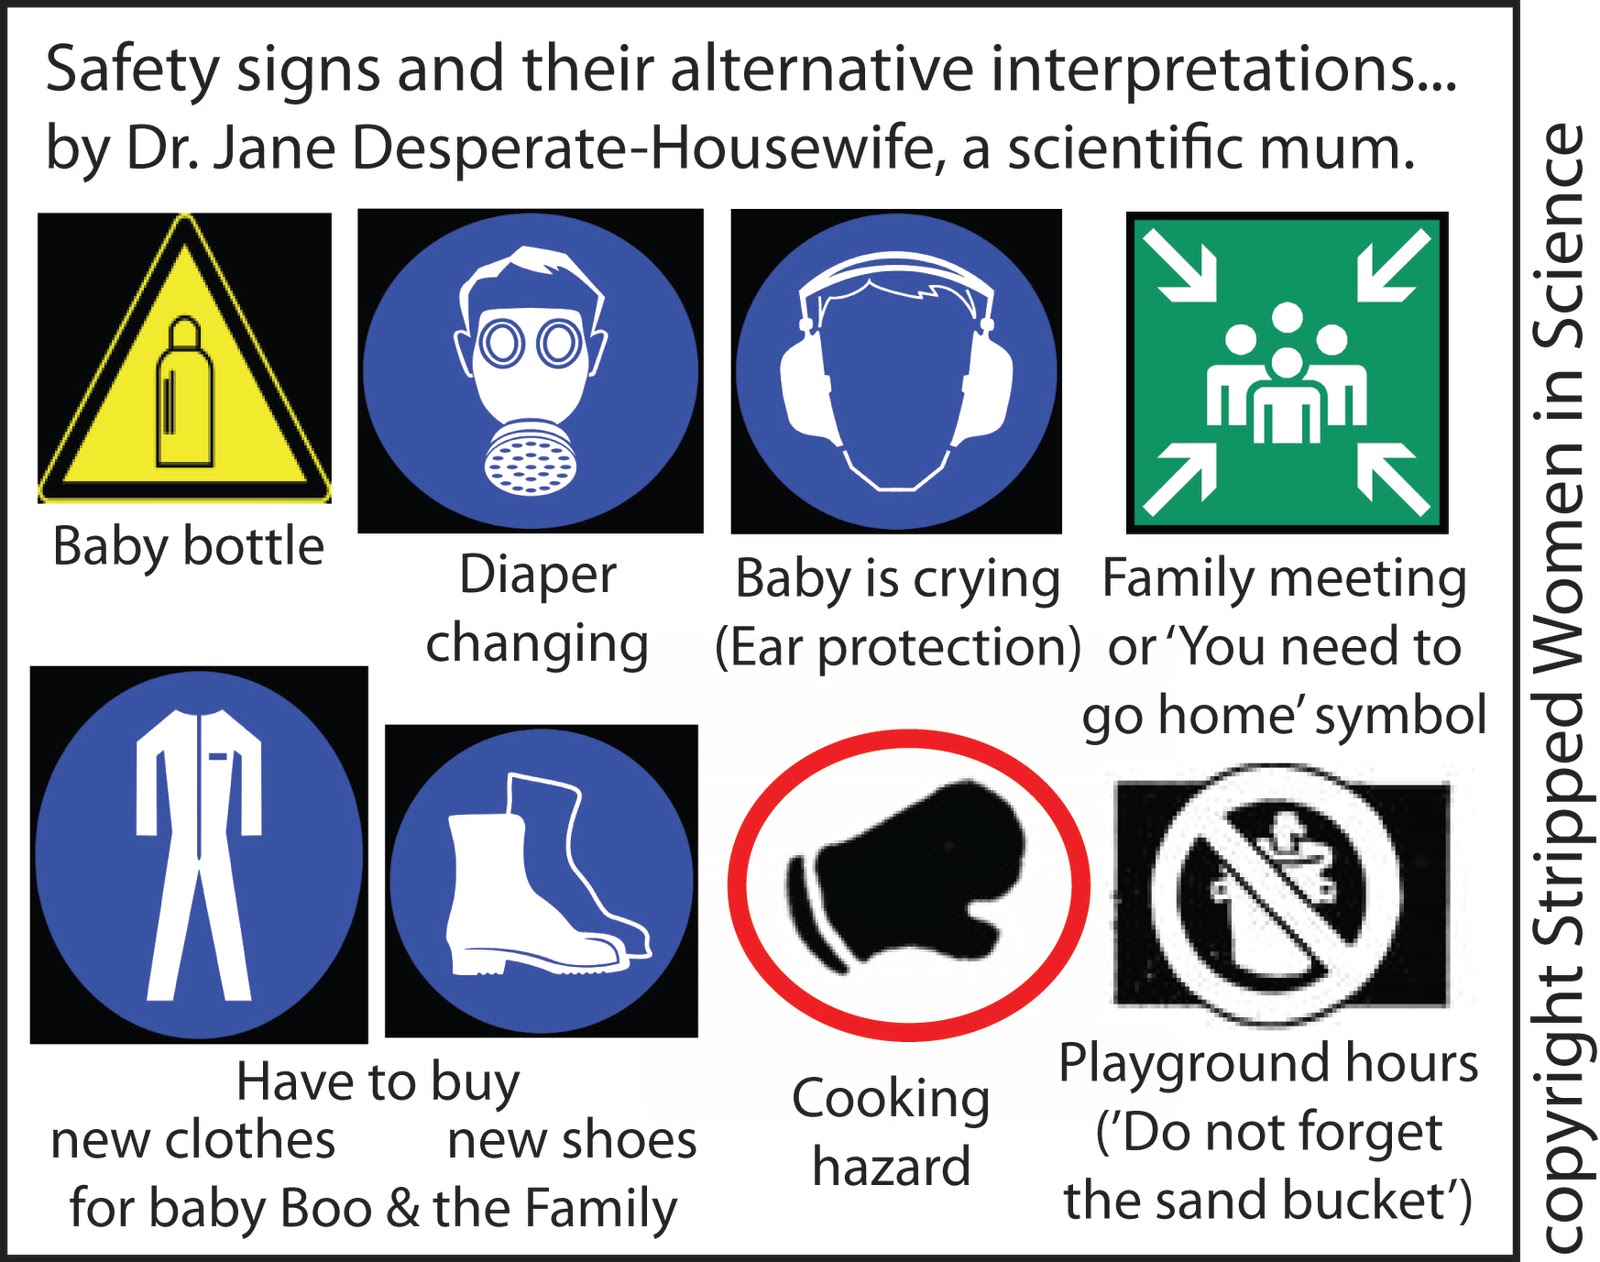 Stripped Women in Science: Safety signs and their interpretations by a